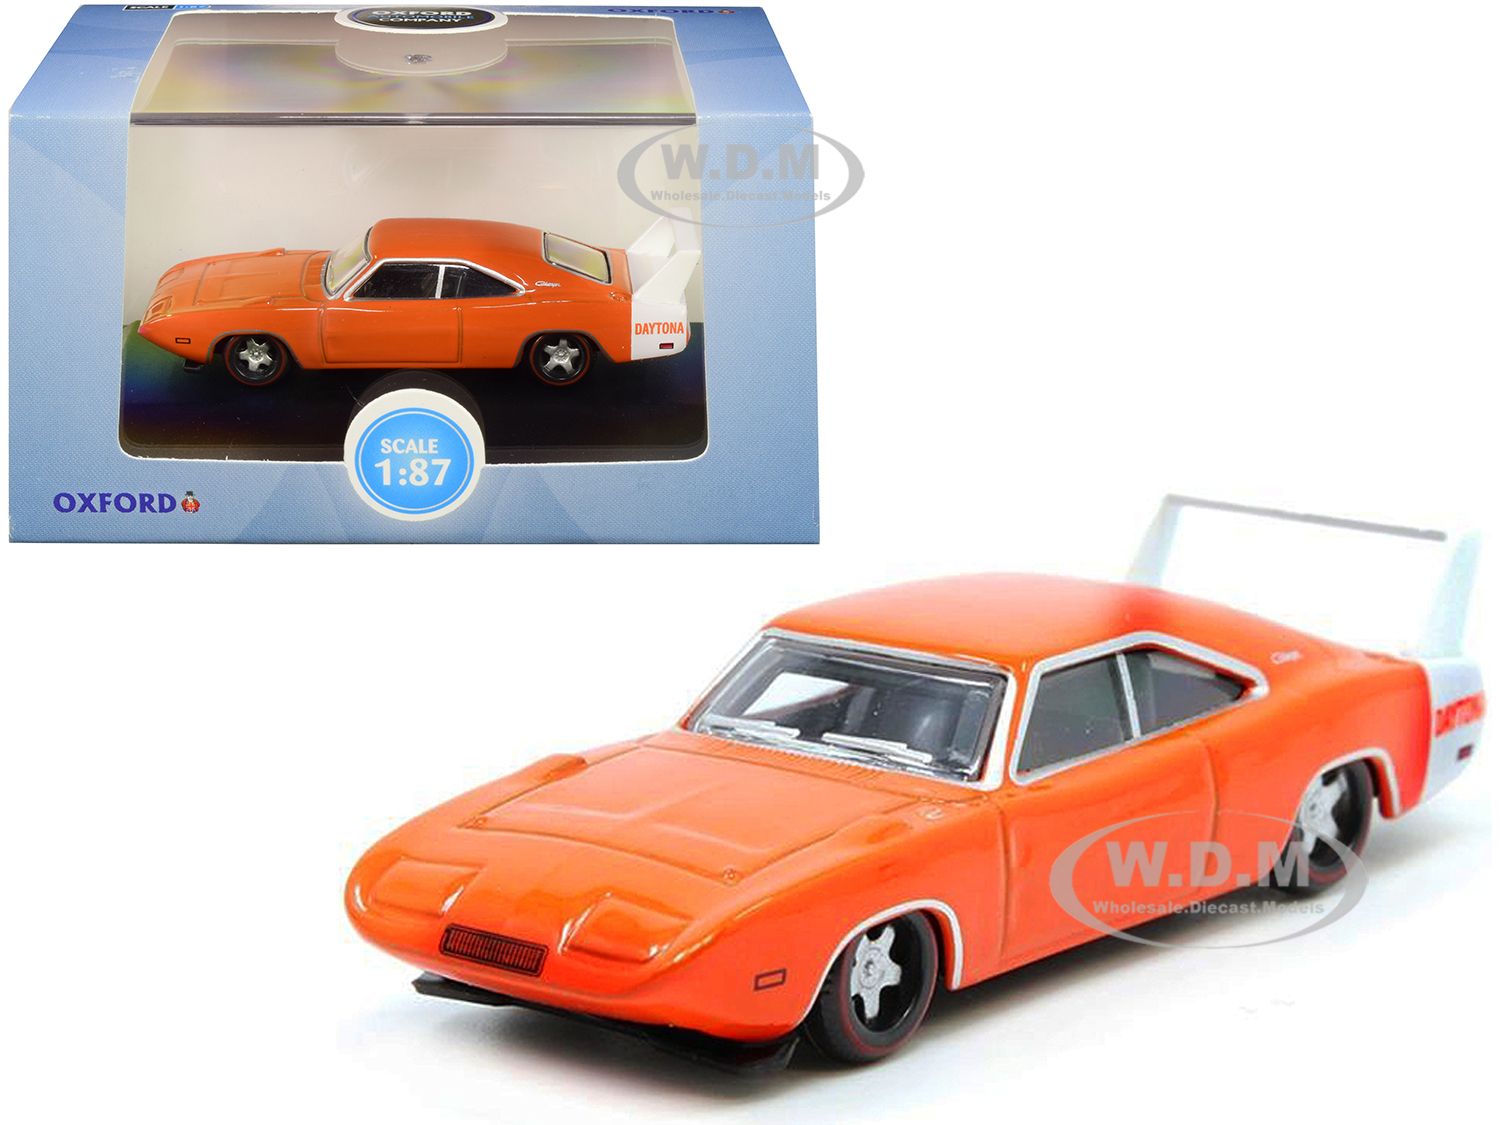 1969 Dodge Charger Daytona Orange With White Stripe 1/87 (ho) Scale Diecast Model Car By Oxford Diecast